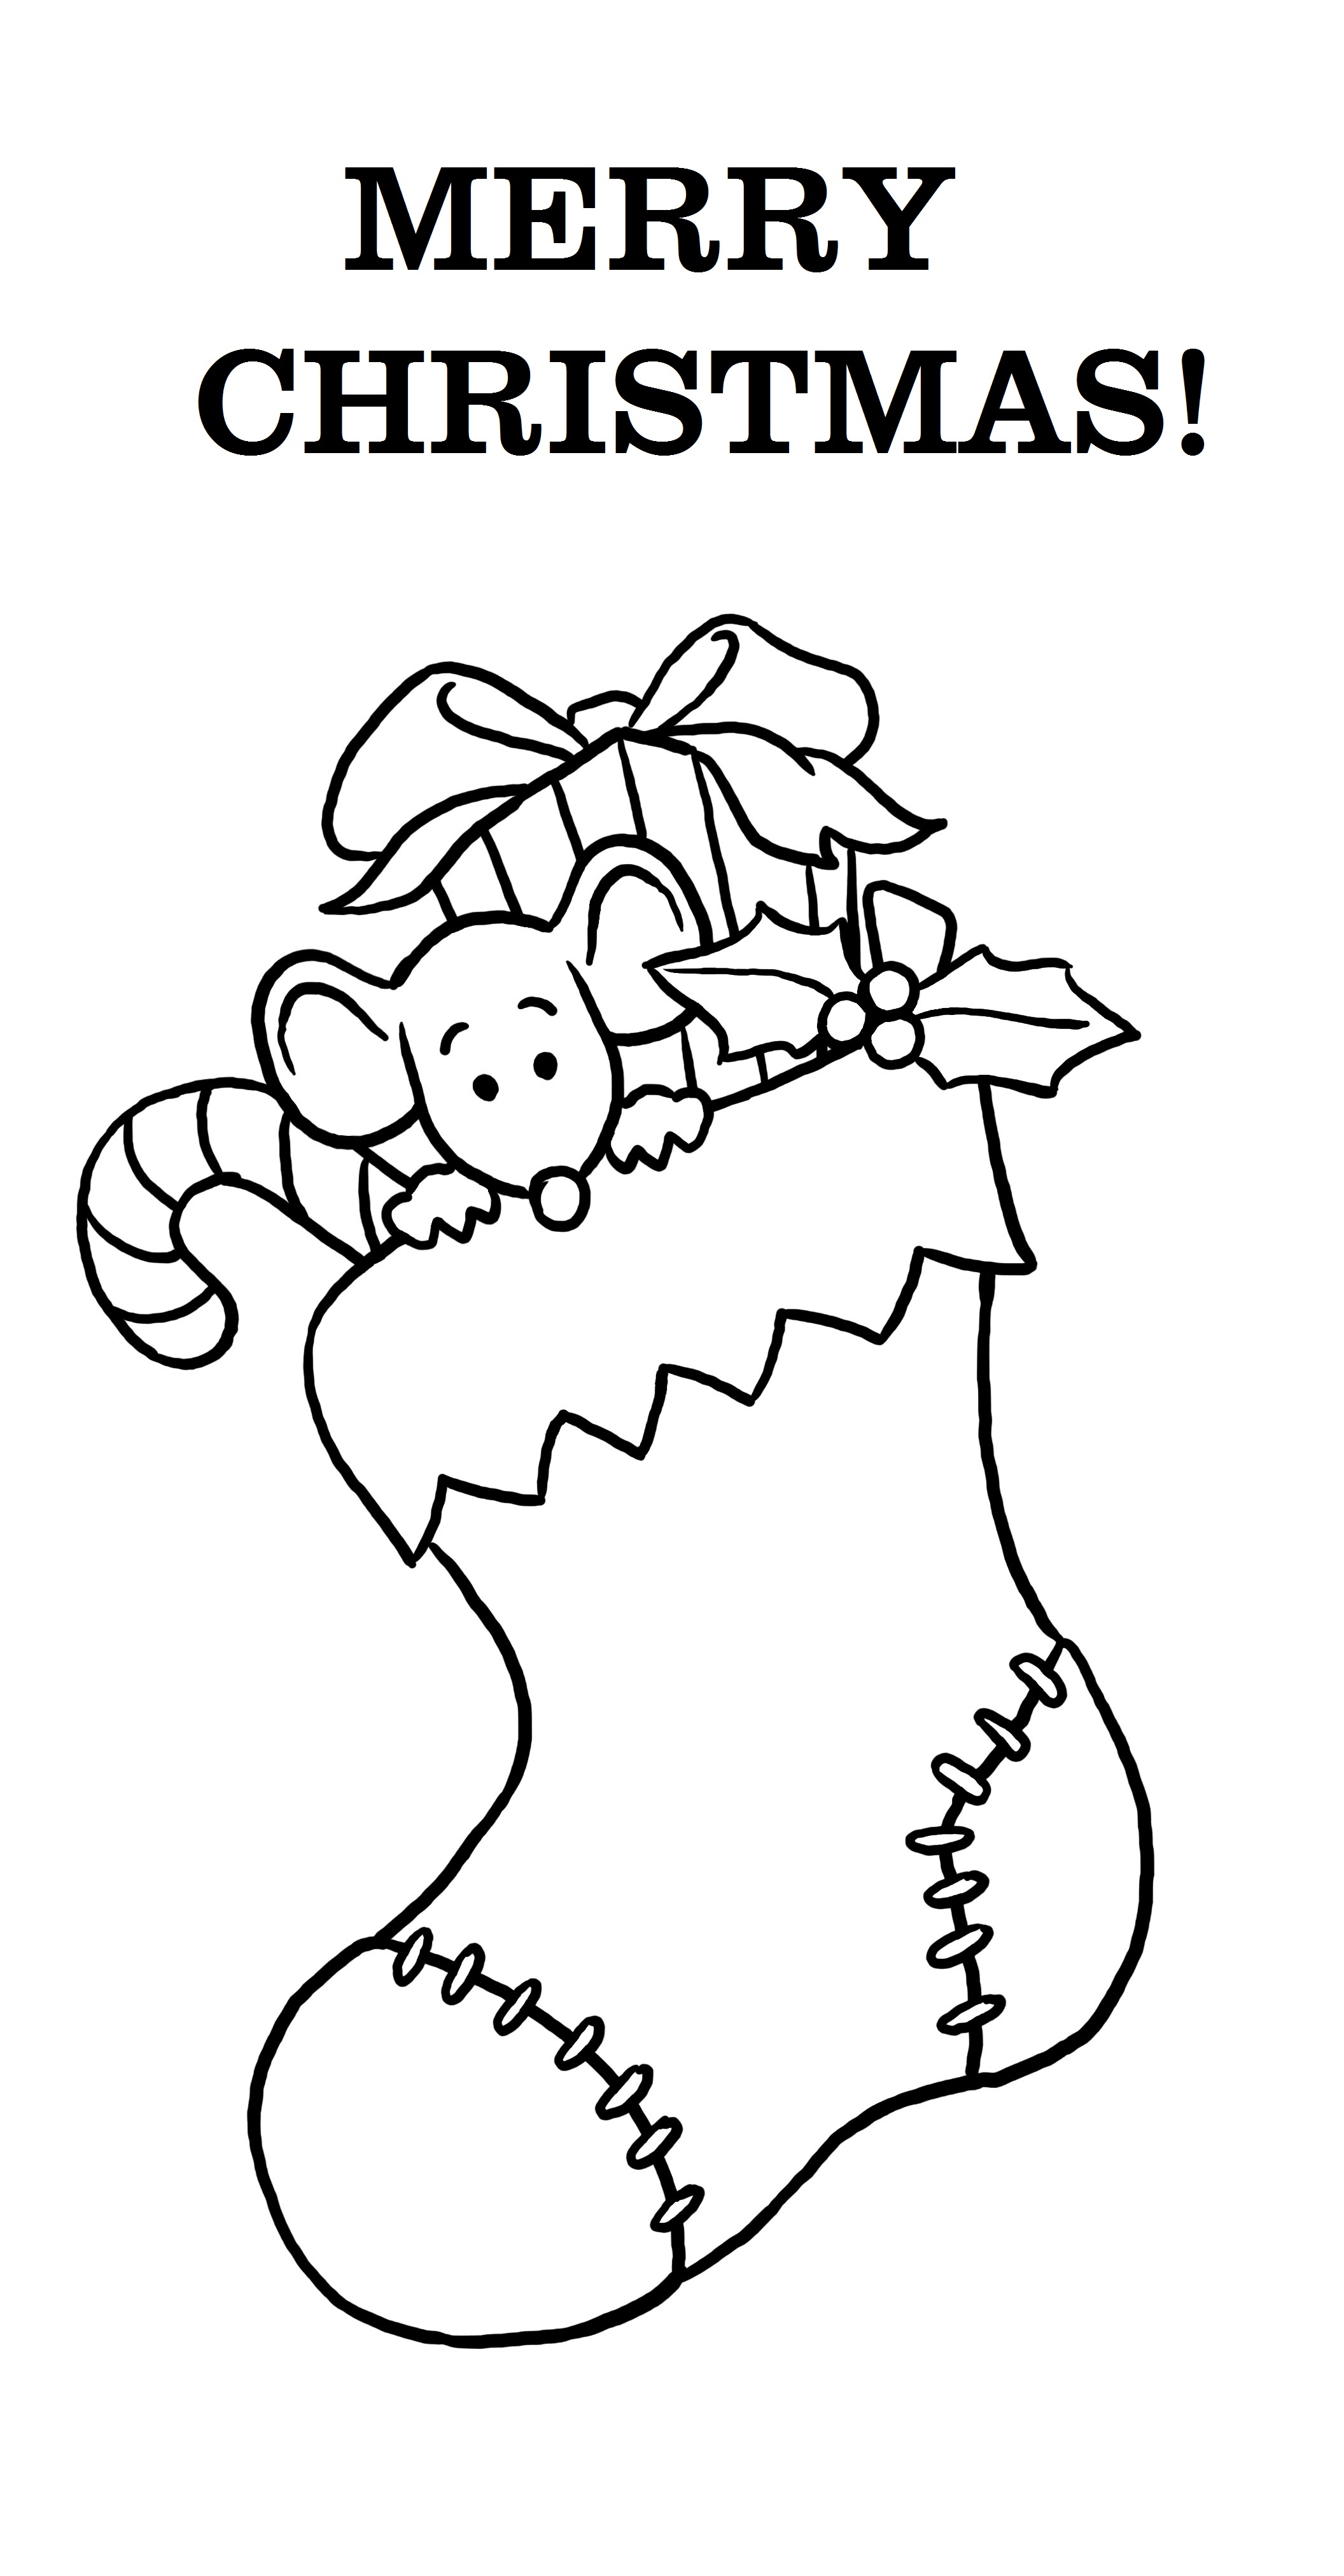 Free Printable Merry Christmas Coloring Pages Effy Moom Free Coloring Picture wallpaper give a chance to color on the wall without getting in trouble! Fill the walls of your home or office with stress-relieving [effymoom.blogspot.com]